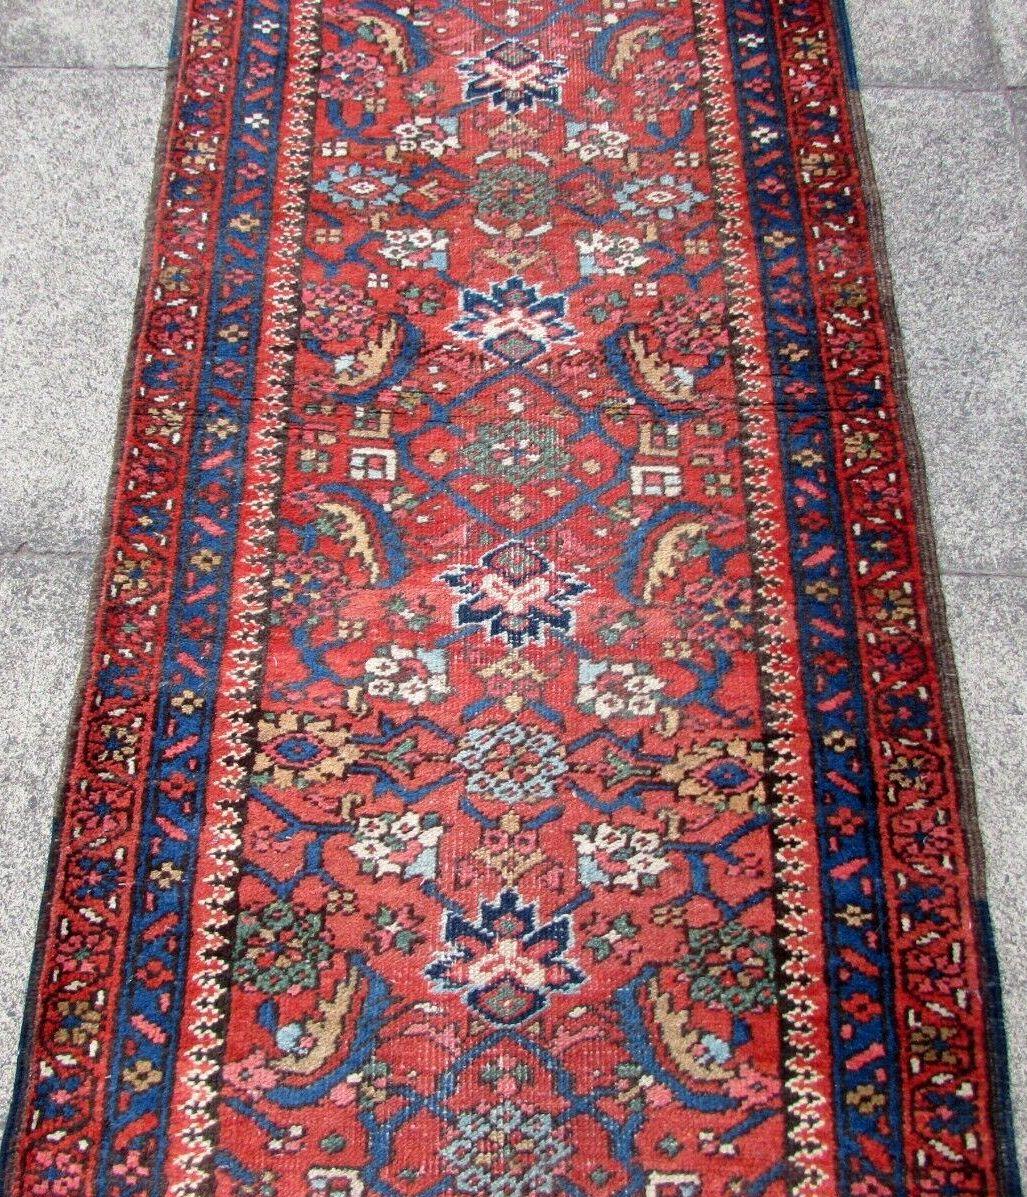 Handmade vintage Mahal style narrow runner in red wool. It is from the beginning of 20th century in original condition, it has low pile.

-Condition: original, low pile,

-circa 1910s,

-Size: 2.7' x 12.4' (78cm x 370cm),

-Material: